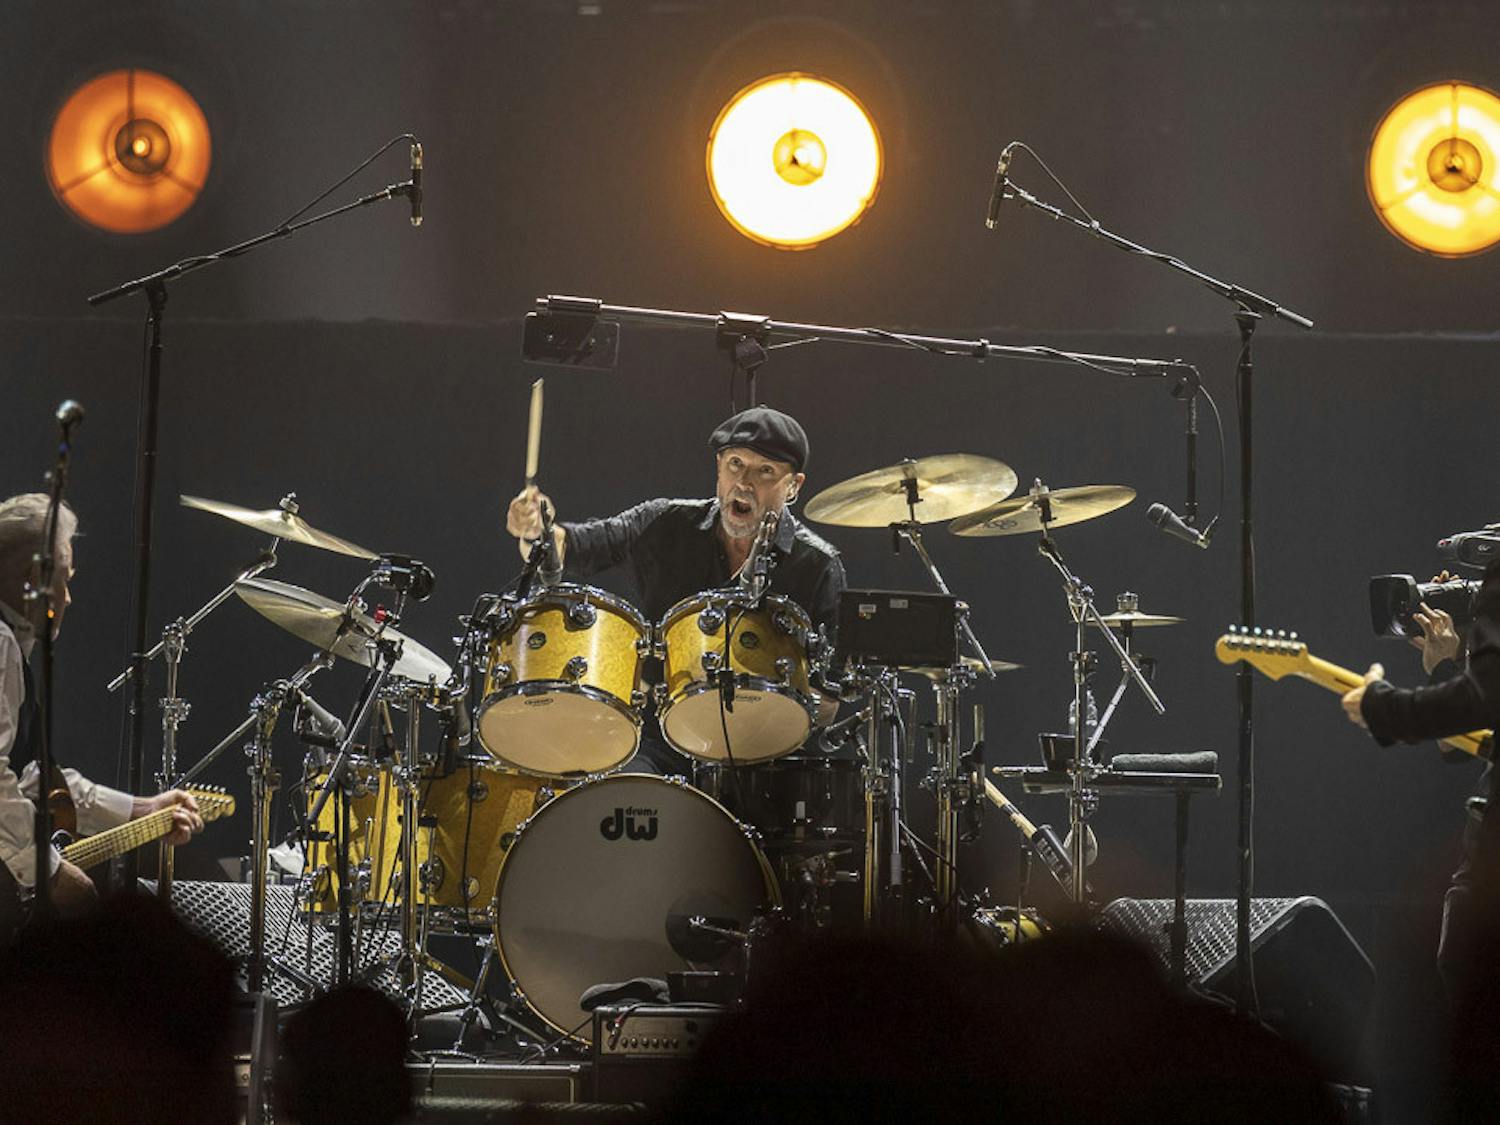 One of the Eagles' stand-in members plays the drums during the band's performance of "Life in the Fast Lane" at Colonial Life Arena on March 30, 2023. The band performed songs from its "Hotel California" album as well as some of its greatest hits.